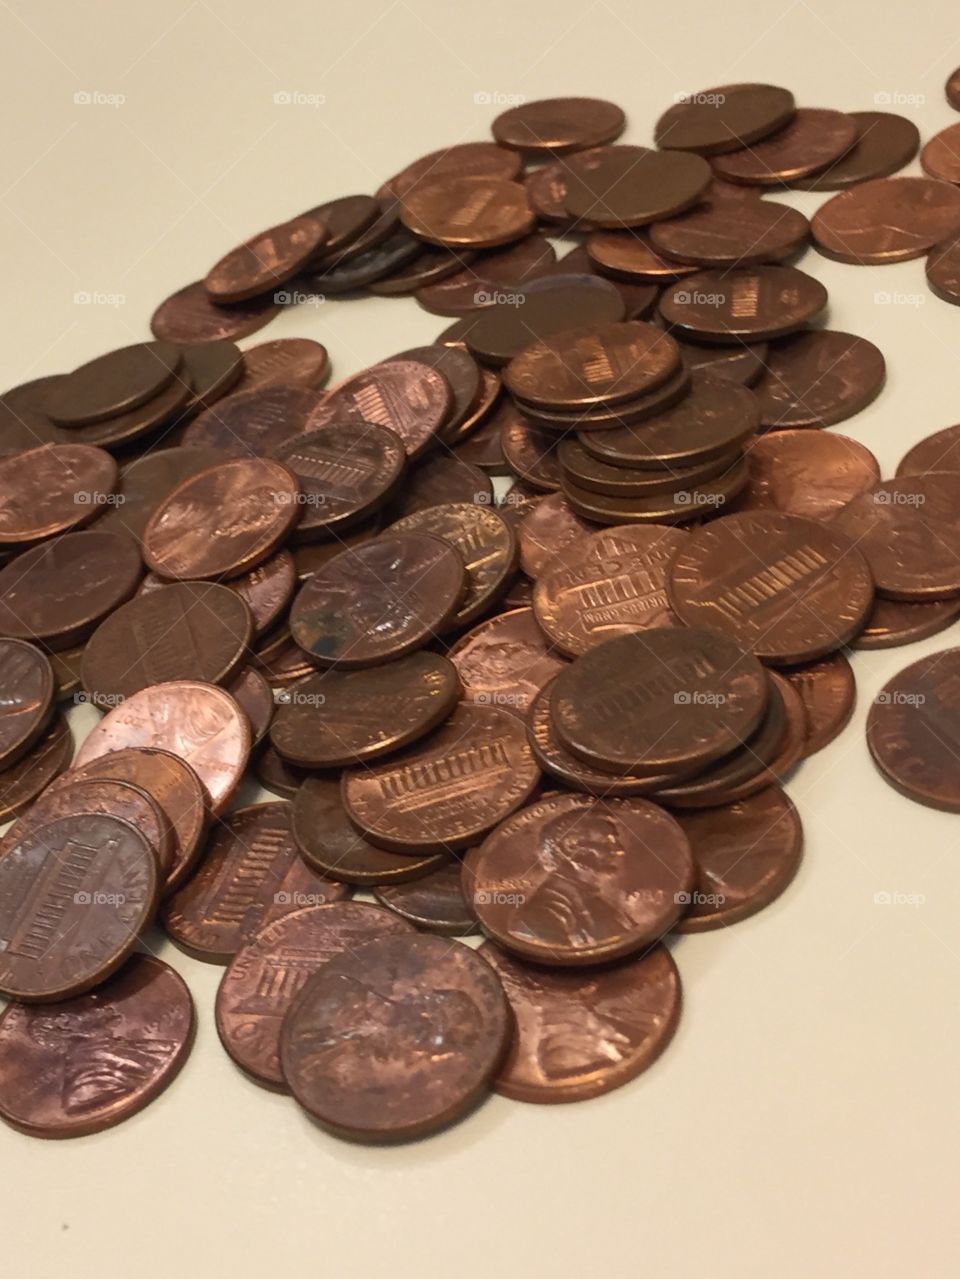 Penny pile